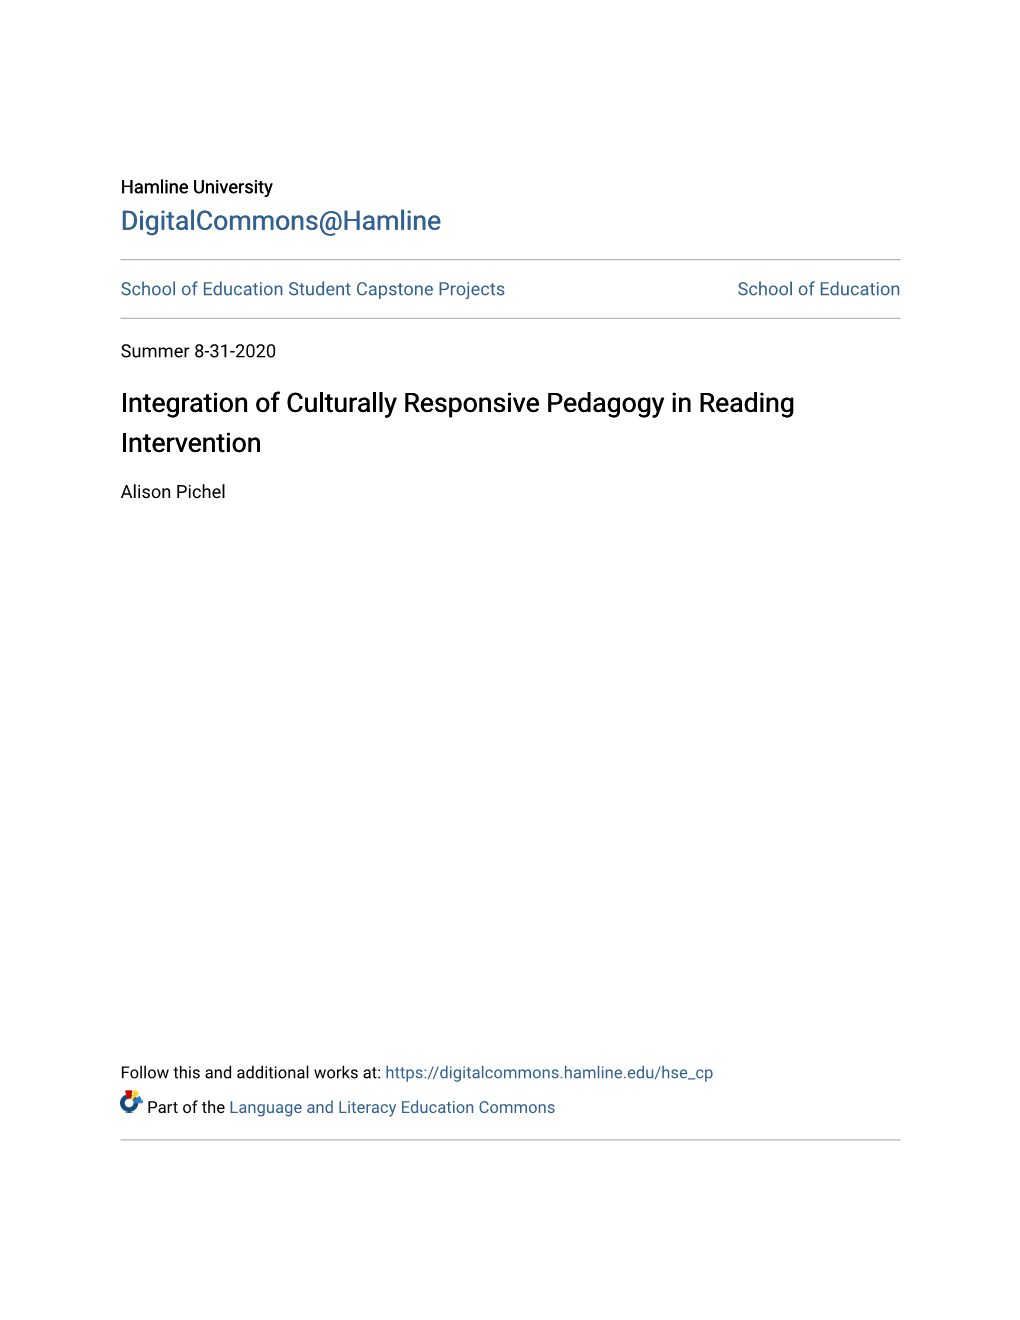 Integration of Culturally Responsive Pedagogy in Reading Intervention